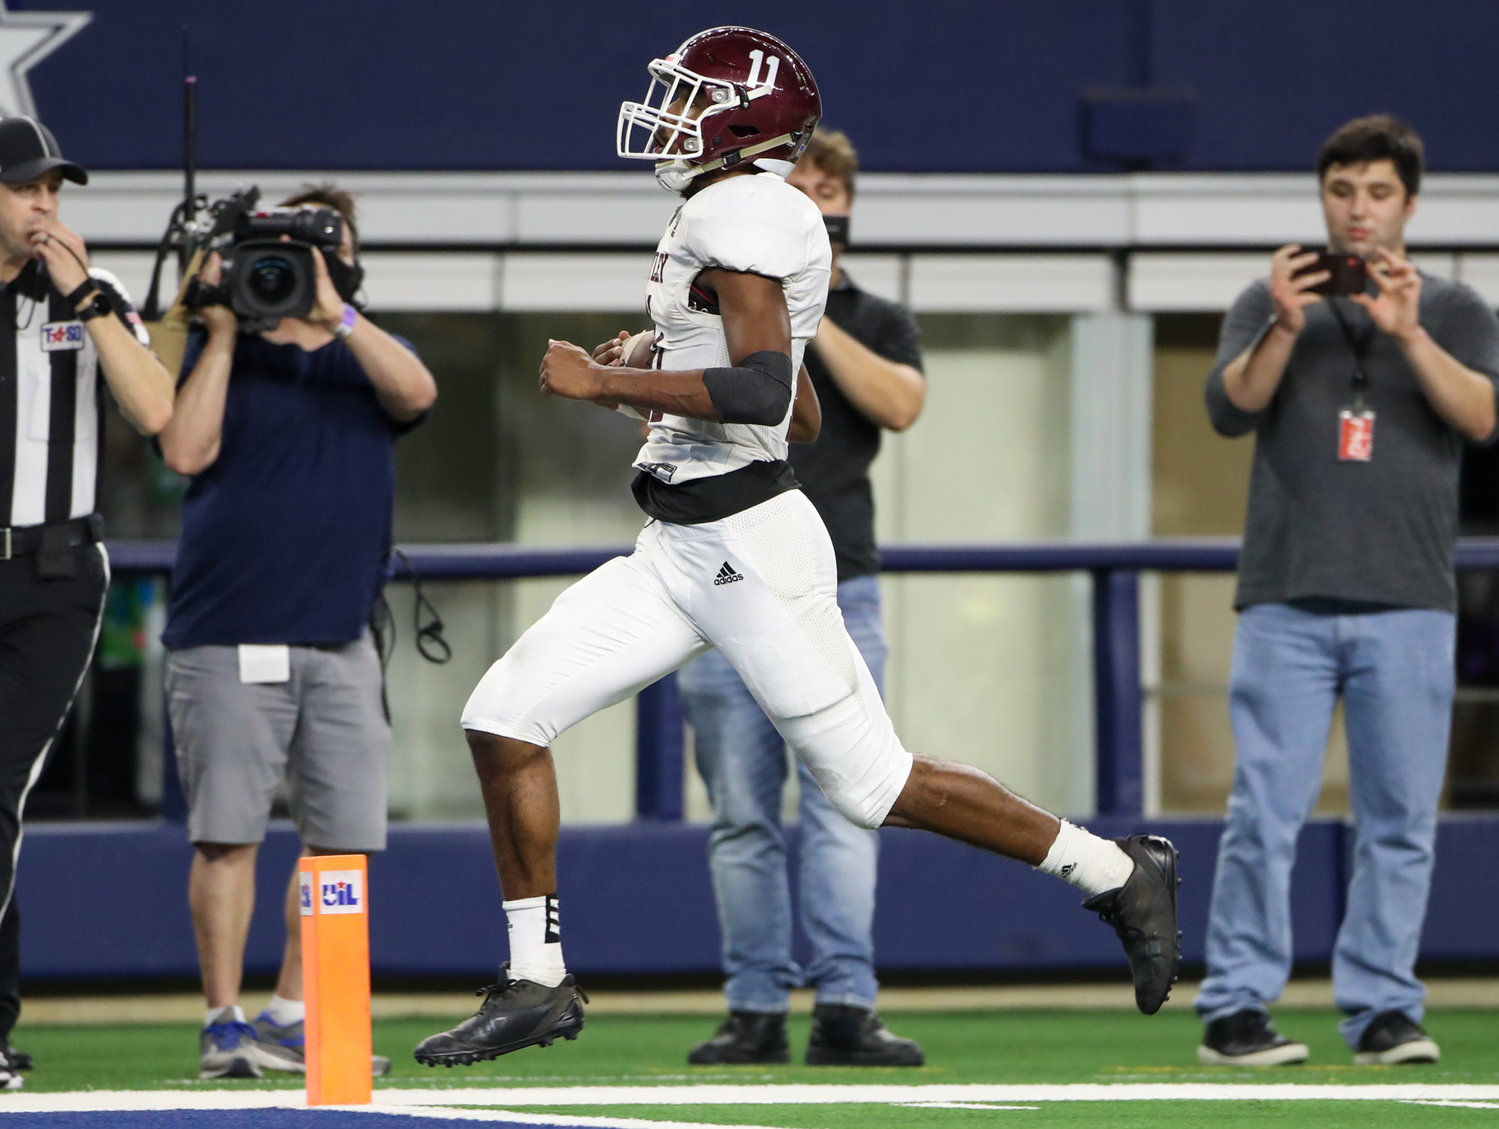 Hawley Bearcats sophomore Diontay Ramon (11) crosses the goal line for a touchdown during the Class 2A Division I state football championship game between Shiner and Hawley on December 15, 2021 in Arlington, Texas.